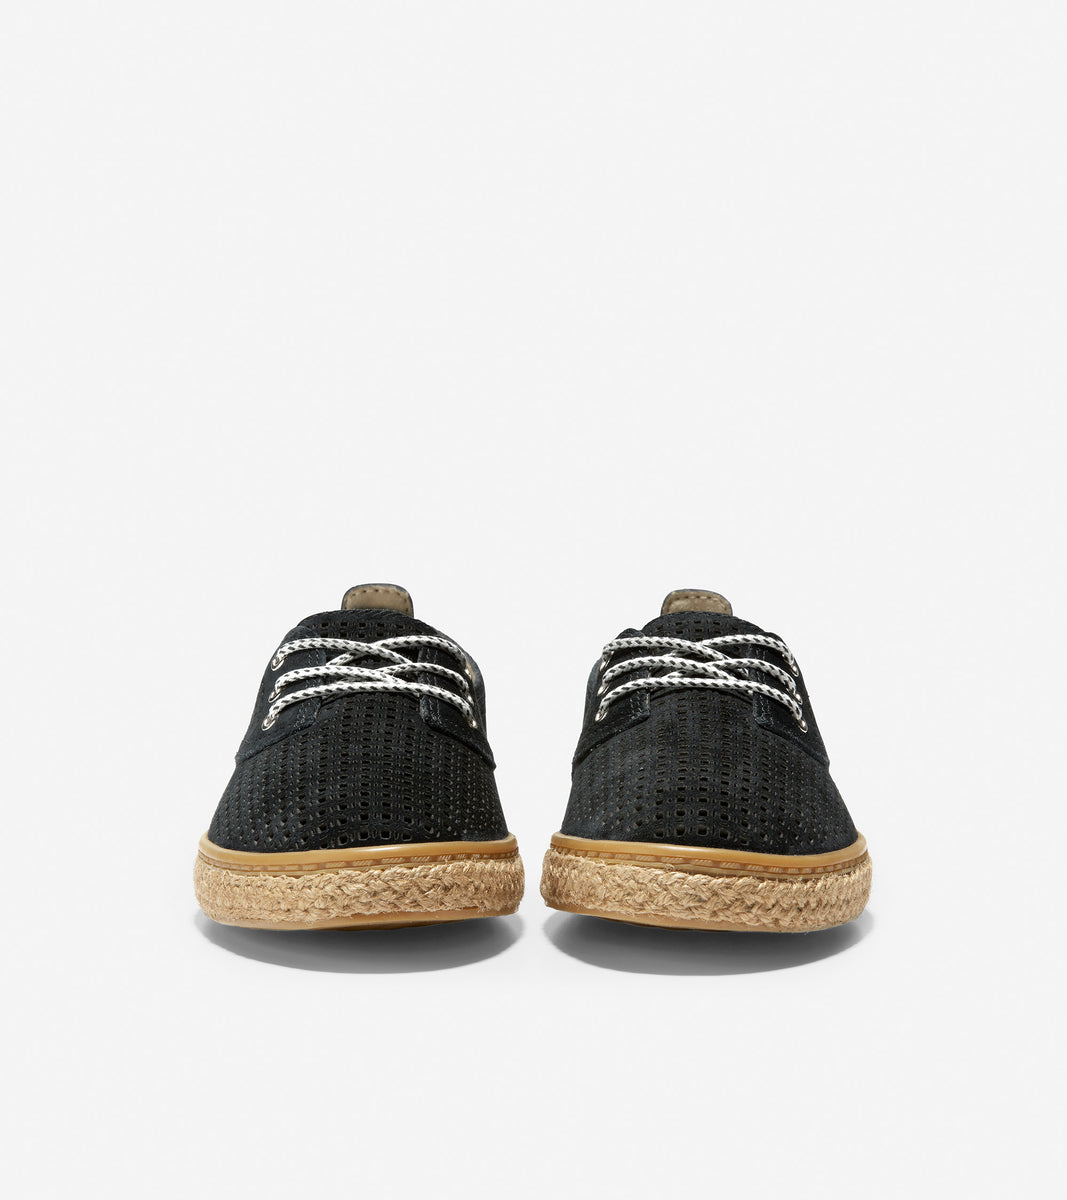 ColeHaan-Cloudfeel Lace Up Espadrille-w18372-Black Suede